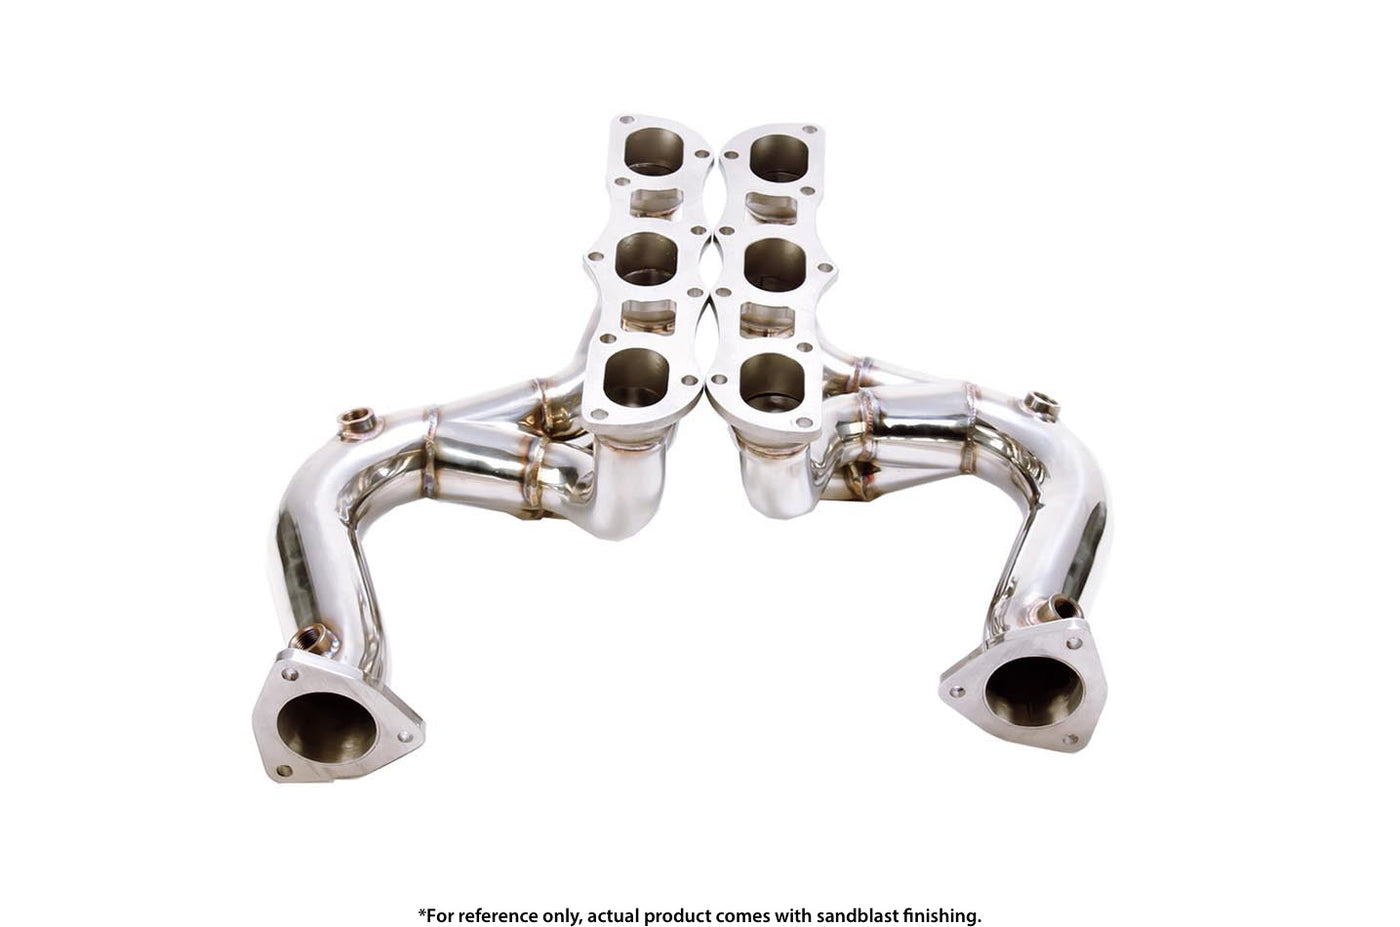 ipe-porsche-911-carrera-s-4s-gts-4-gts-991-f1-edition-exhaust-headers-with-cat-bypass-pipe